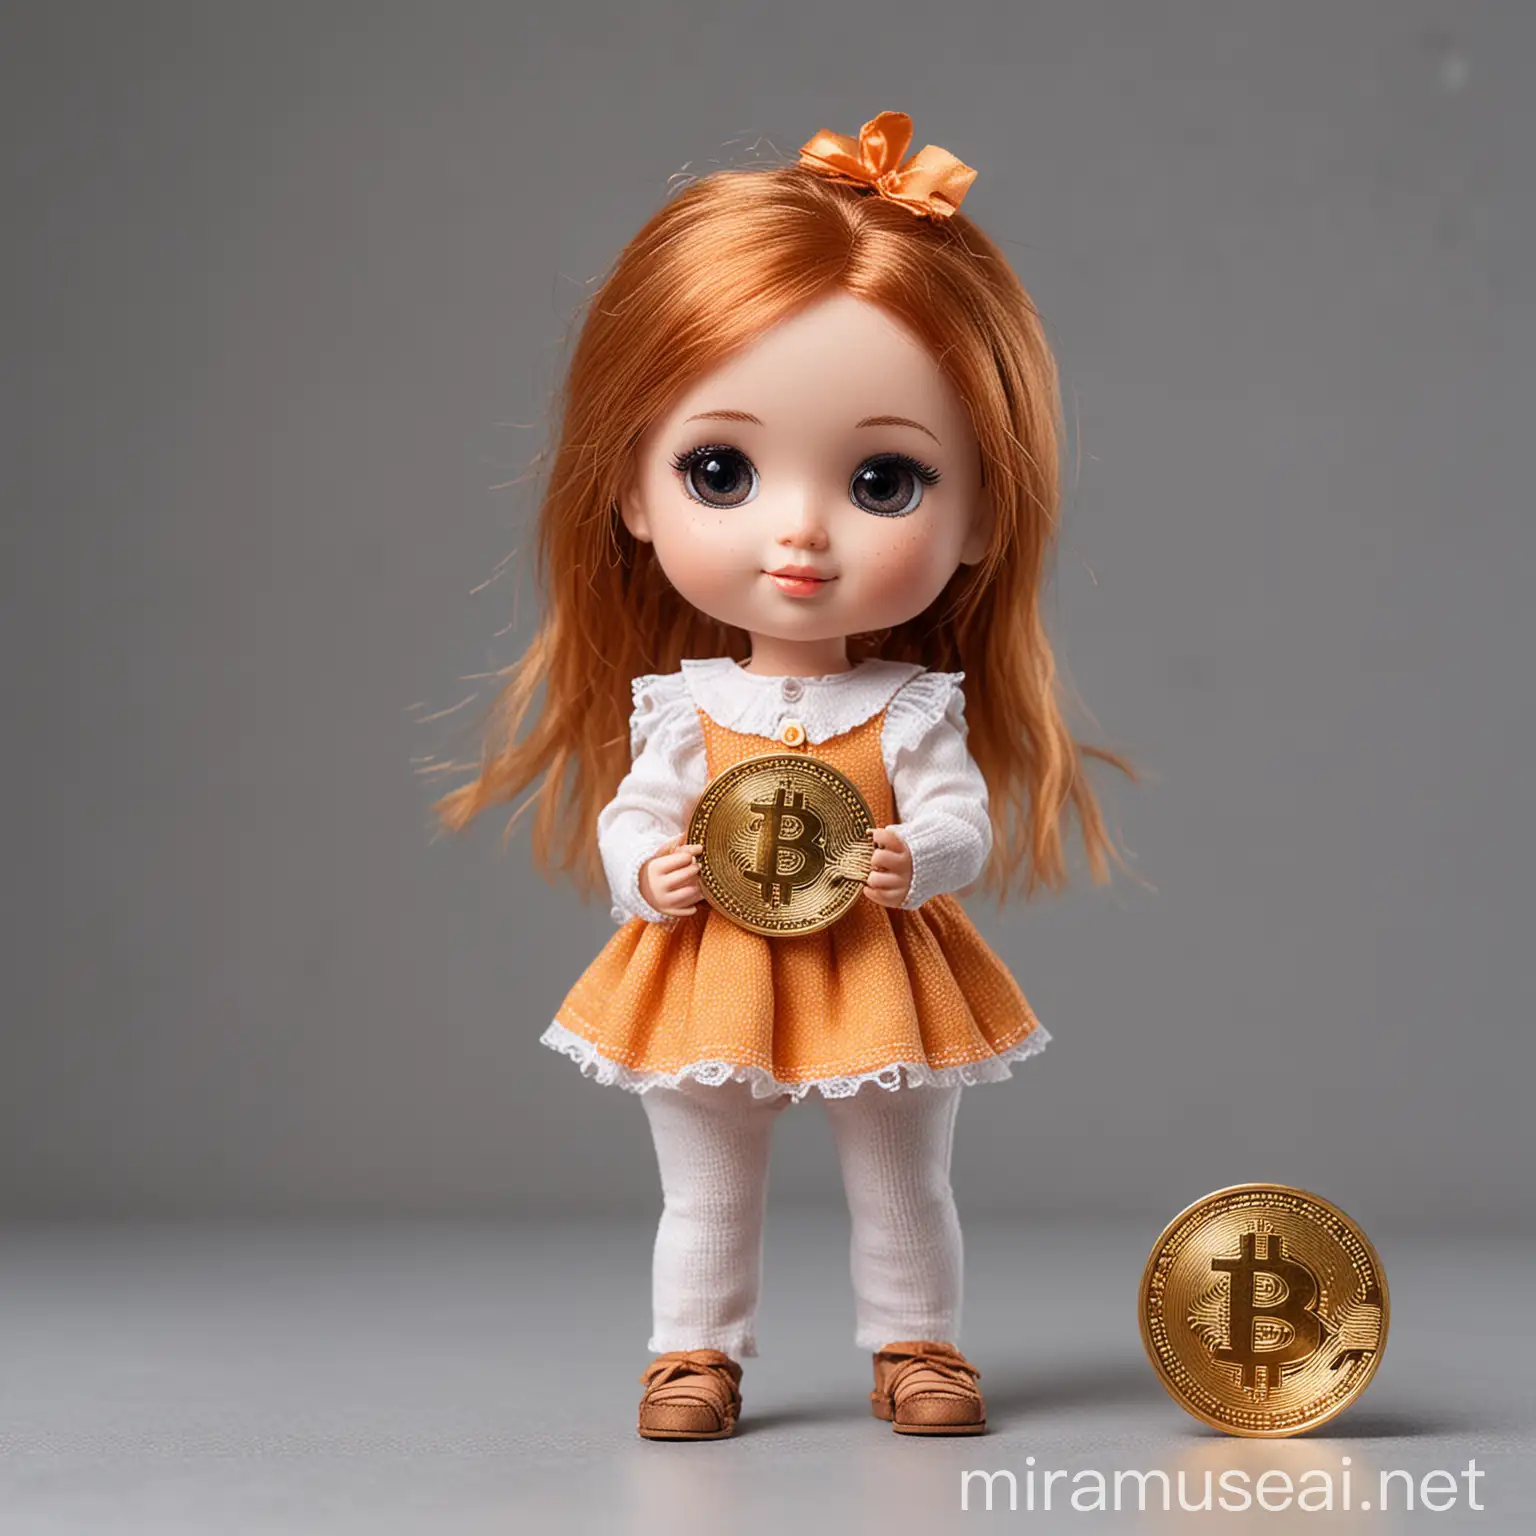 Cute little doll standing and holding a big bitcoin coin